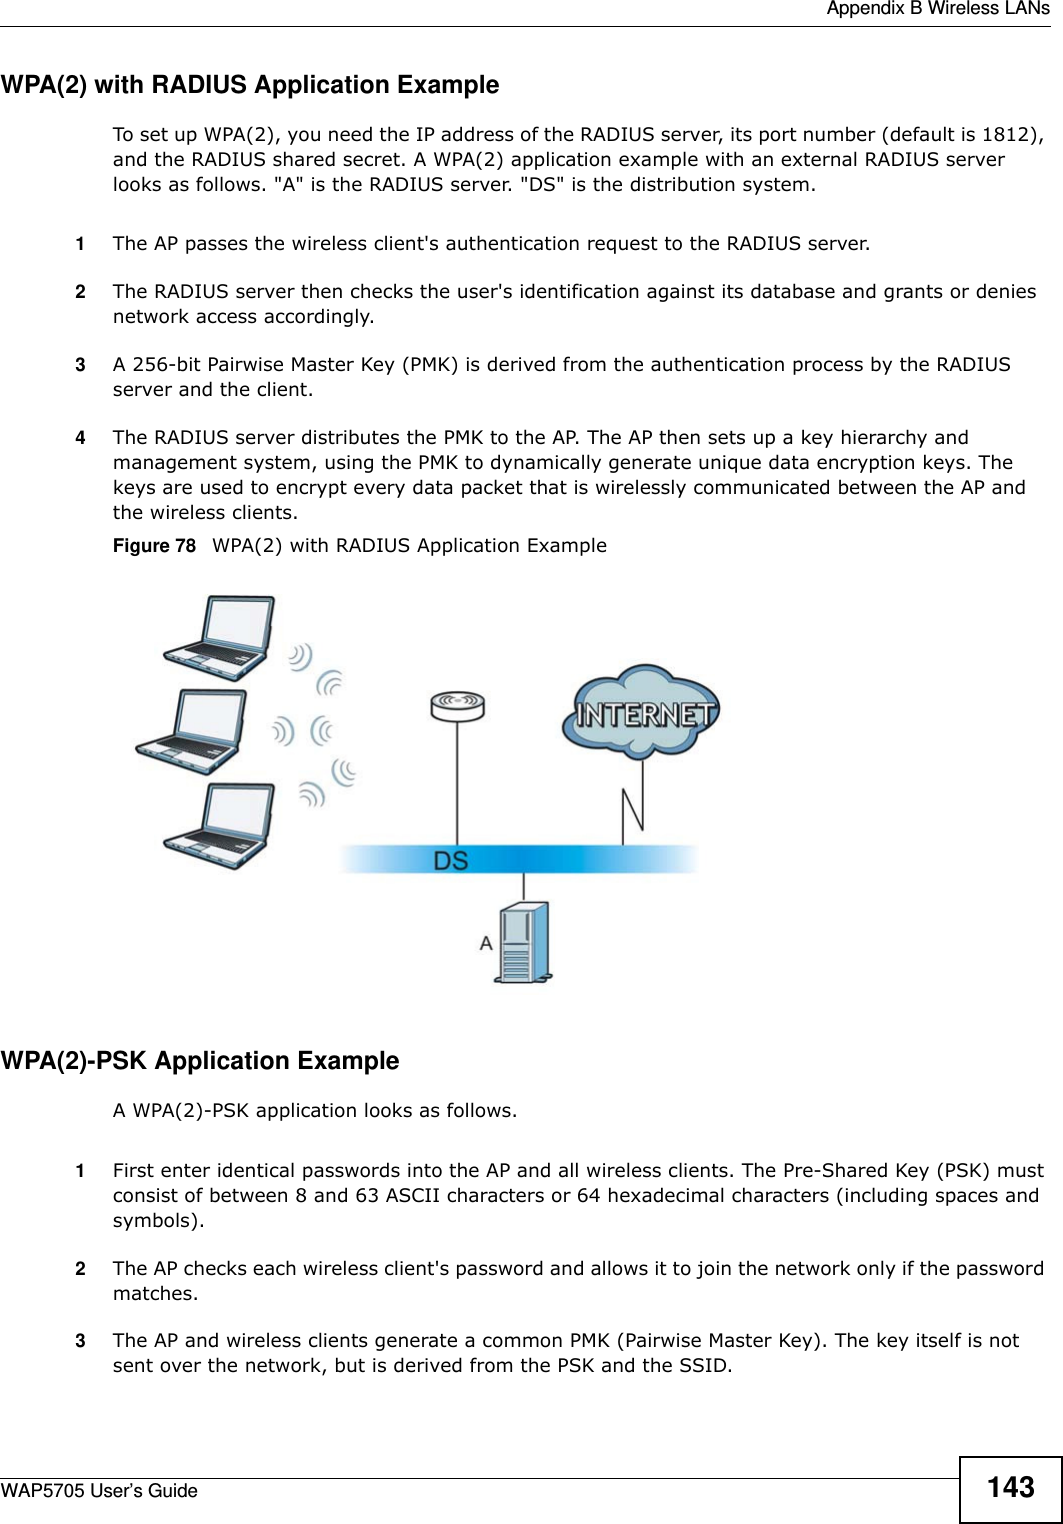  Appendix B Wireless LANsWAP5705 User’s Guide 143WPA(2) with RADIUS Application ExampleTo set up WPA(2), you need the IP address of the RADIUS server, its port number (default is 1812), and the RADIUS shared secret. A WPA(2) application example with an external RADIUS server looks as follows. &quot;A&quot; is the RADIUS server. &quot;DS&quot; is the distribution system.1The AP passes the wireless client&apos;s authentication request to the RADIUS server.2The RADIUS server then checks the user&apos;s identification against its database and grants or denies network access accordingly.3A 256-bit Pairwise Master Key (PMK) is derived from the authentication process by the RADIUS server and the client.4The RADIUS server distributes the PMK to the AP. The AP then sets up a key hierarchy and management system, using the PMK to dynamically generate unique data encryption keys. The keys are used to encrypt every data packet that is wirelessly communicated between the AP and the wireless clients.Figure 78   WPA(2) with RADIUS Application ExampleWPA(2)-PSK Application ExampleA WPA(2)-PSK application looks as follows.1First enter identical passwords into the AP and all wireless clients. The Pre-Shared Key (PSK) must consist of between 8 and 63 ASCII characters or 64 hexadecimal characters (including spaces and symbols).2The AP checks each wireless client&apos;s password and allows it to join the network only if the password matches.3The AP and wireless clients generate a common PMK (Pairwise Master Key). The key itself is not sent over the network, but is derived from the PSK and the SSID. 